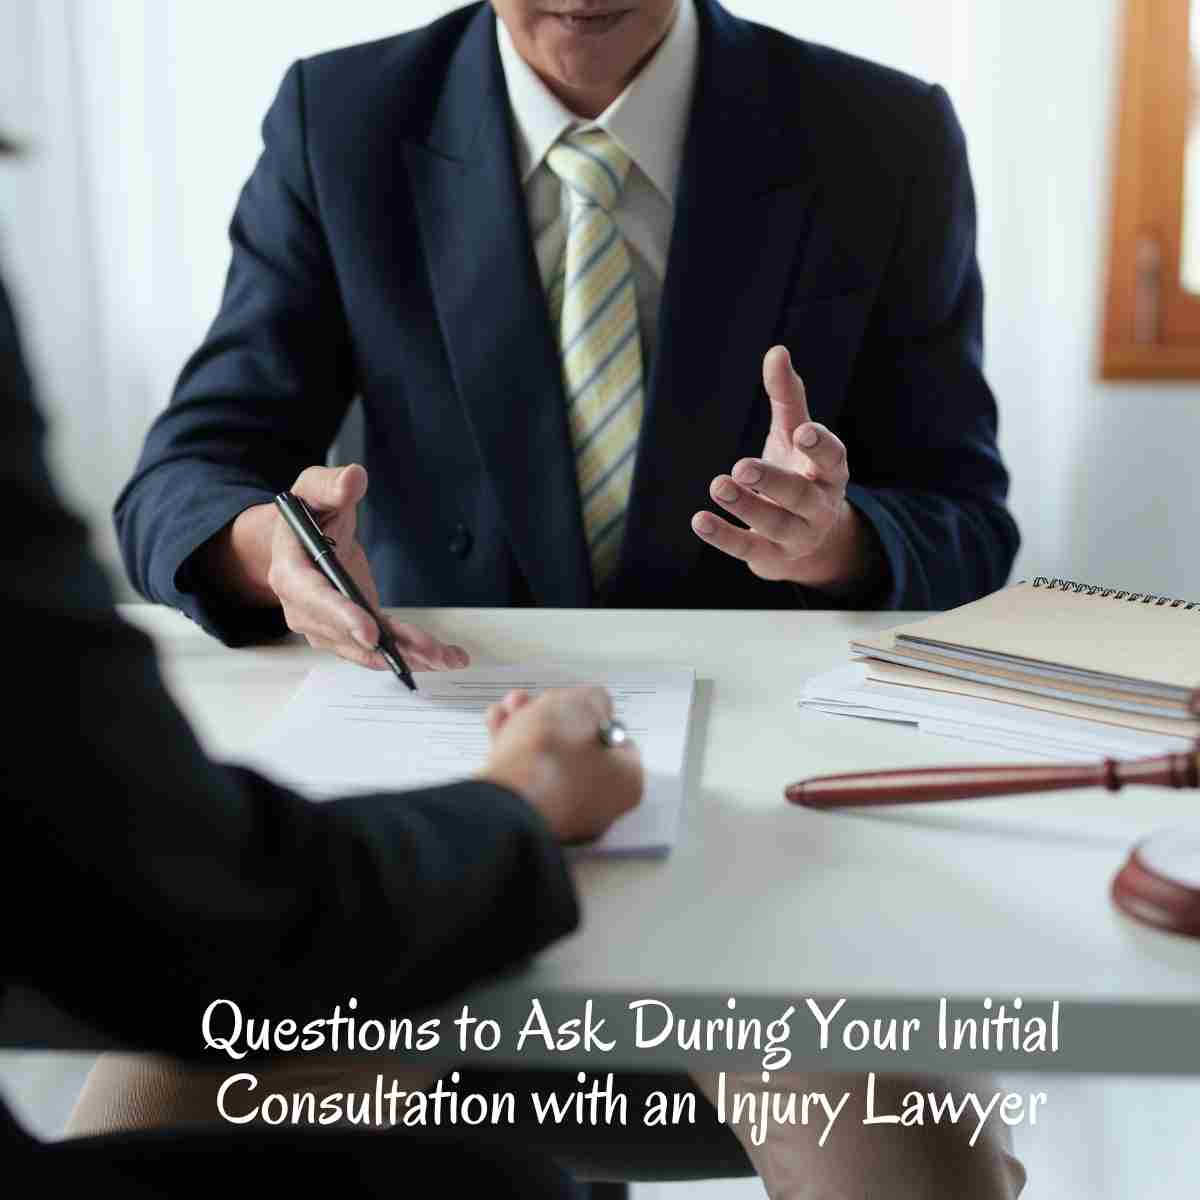 Consultation with an Injury Lawyer